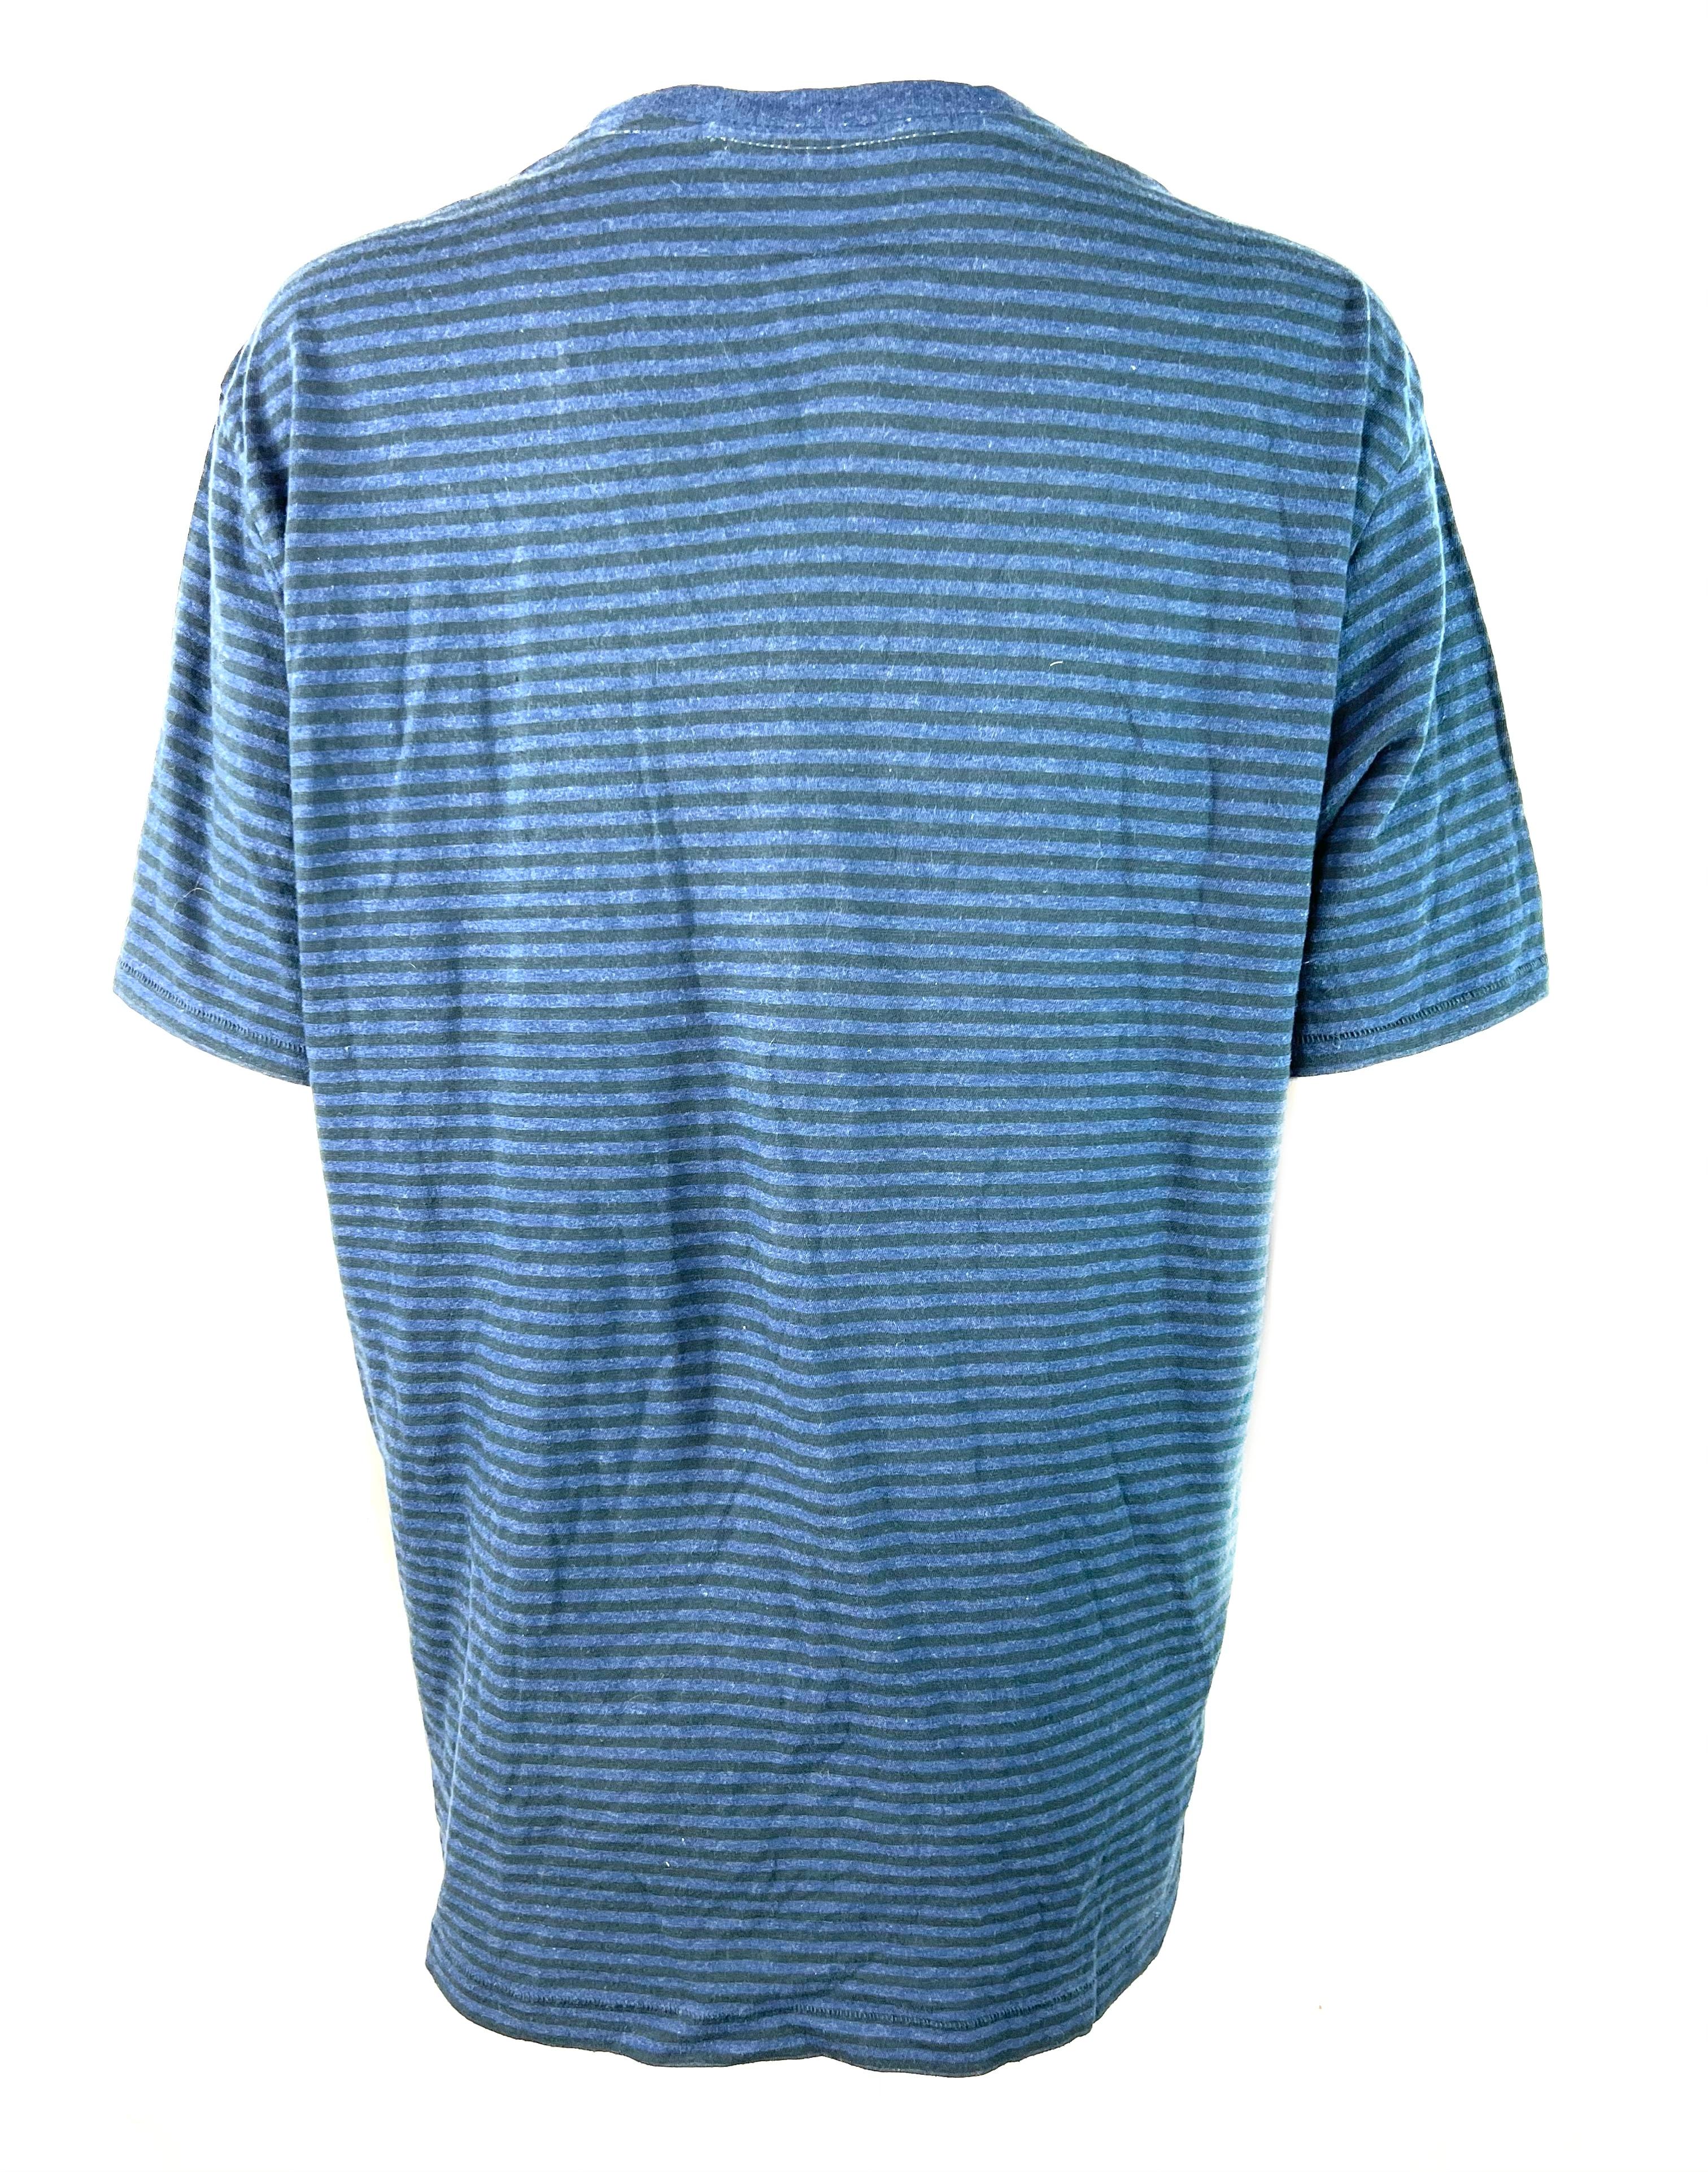 Rag and Bone Black and Blue Cotton T- Shirt, Size XL For Sale 1